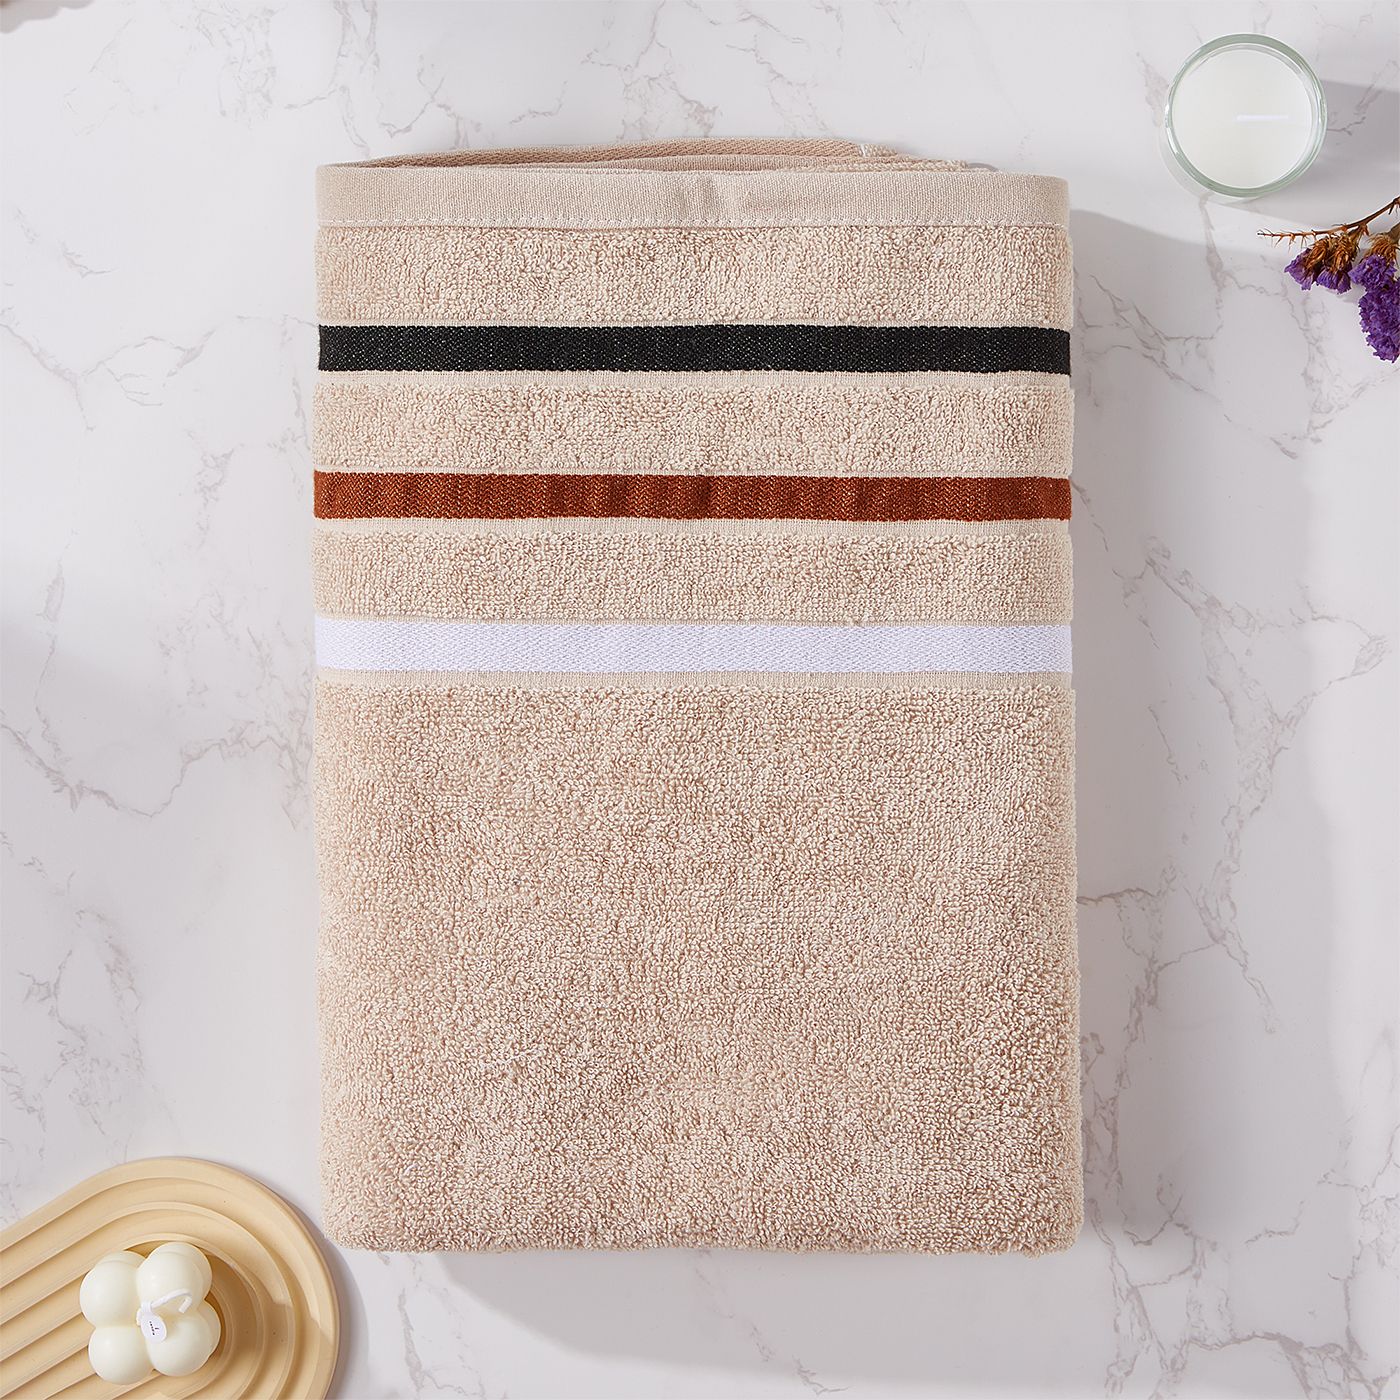 Soft Cotton Bath Towel - Perfect For Home, Beach, And Hotel Use